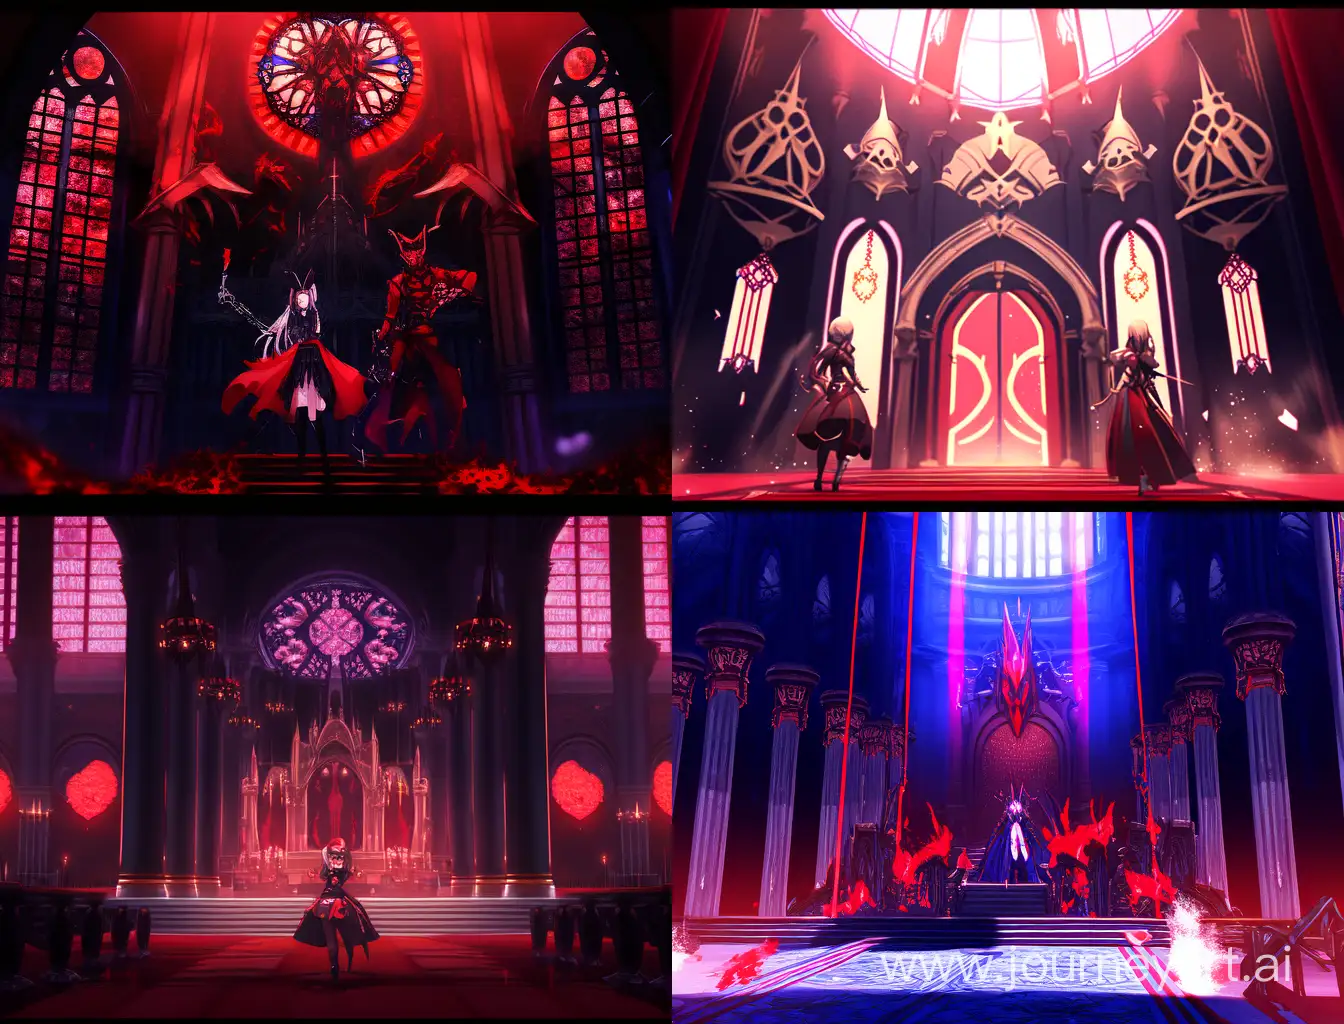 Enchanting-Royal-HoloGothic-Scene-with-Red-and-Black-Holographic-Elements